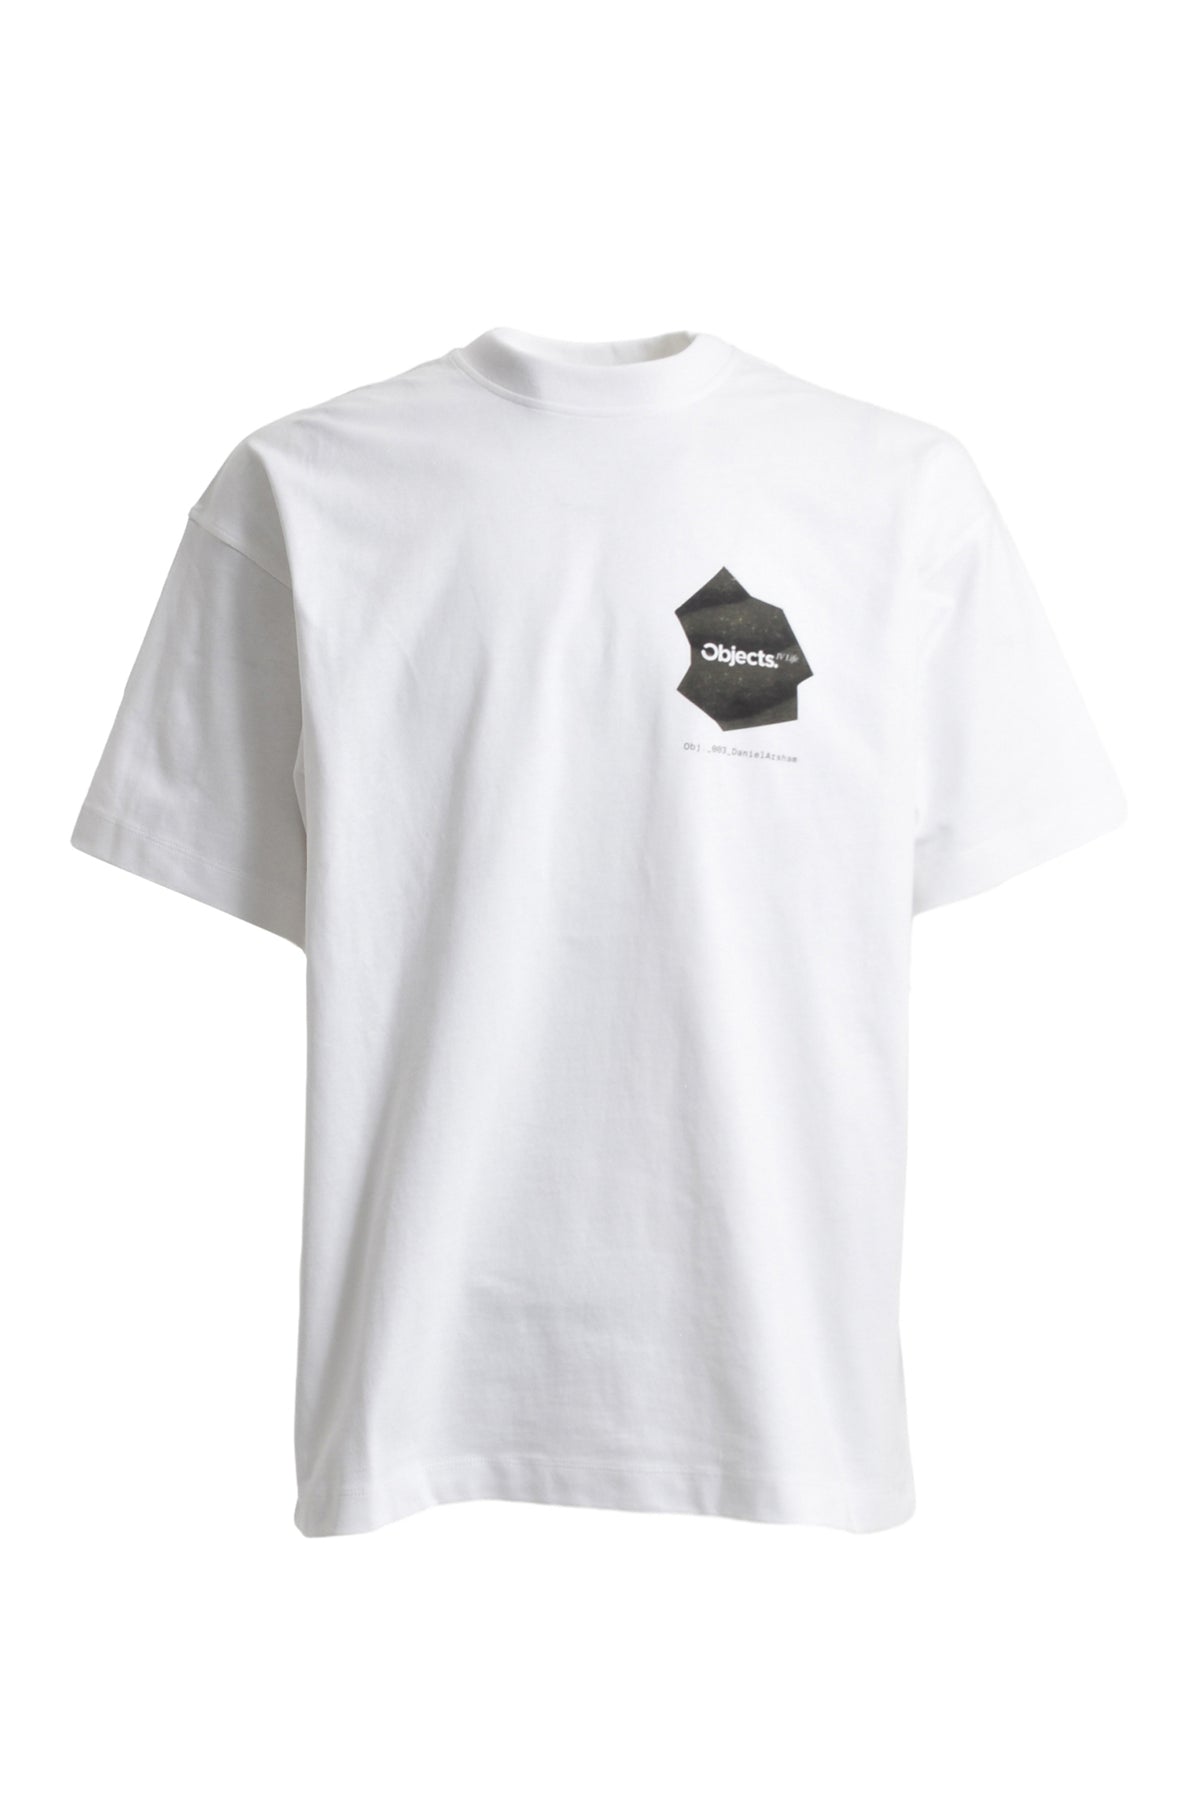 THOUGHT-BUBBLE SPRAY T-SHIRT / WHT